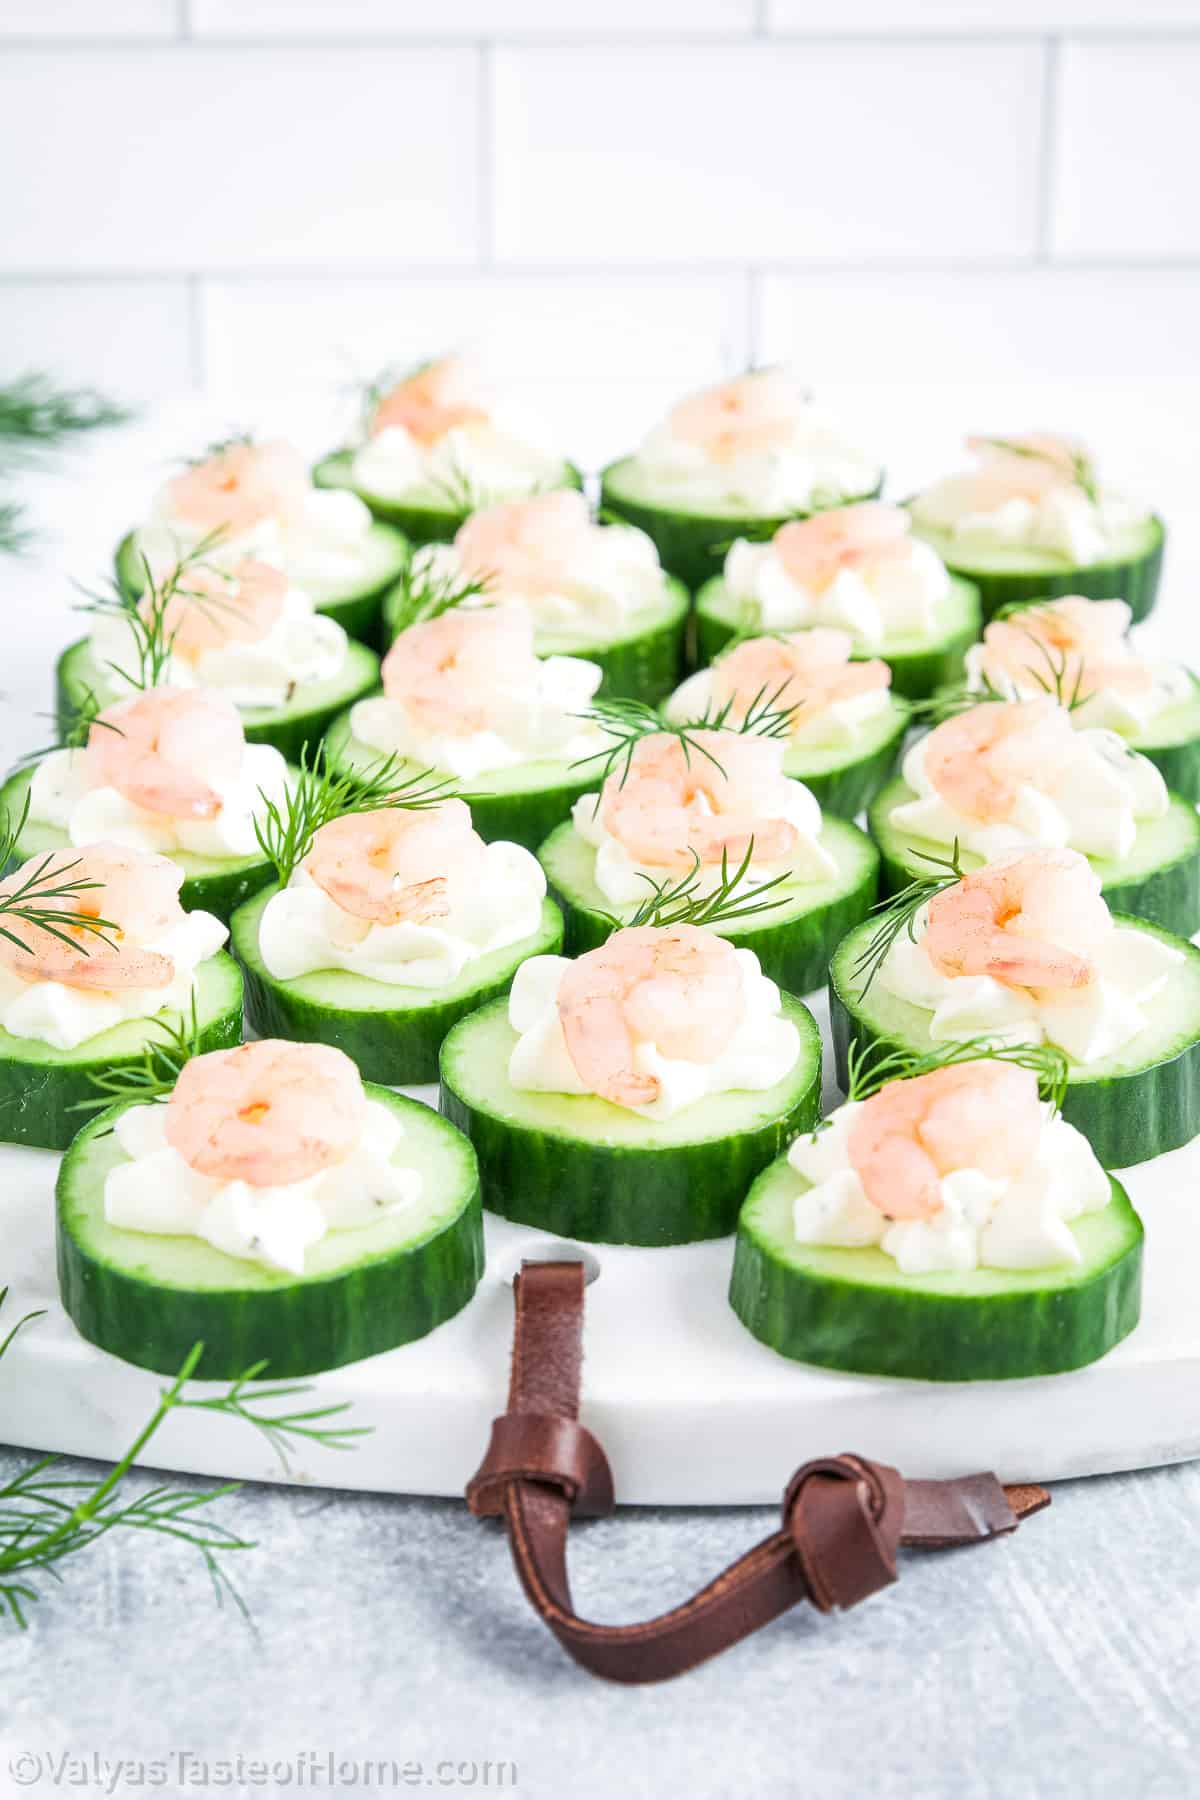 This recipe for cucumber shrimp appetizers is a game-changer for your party menu.